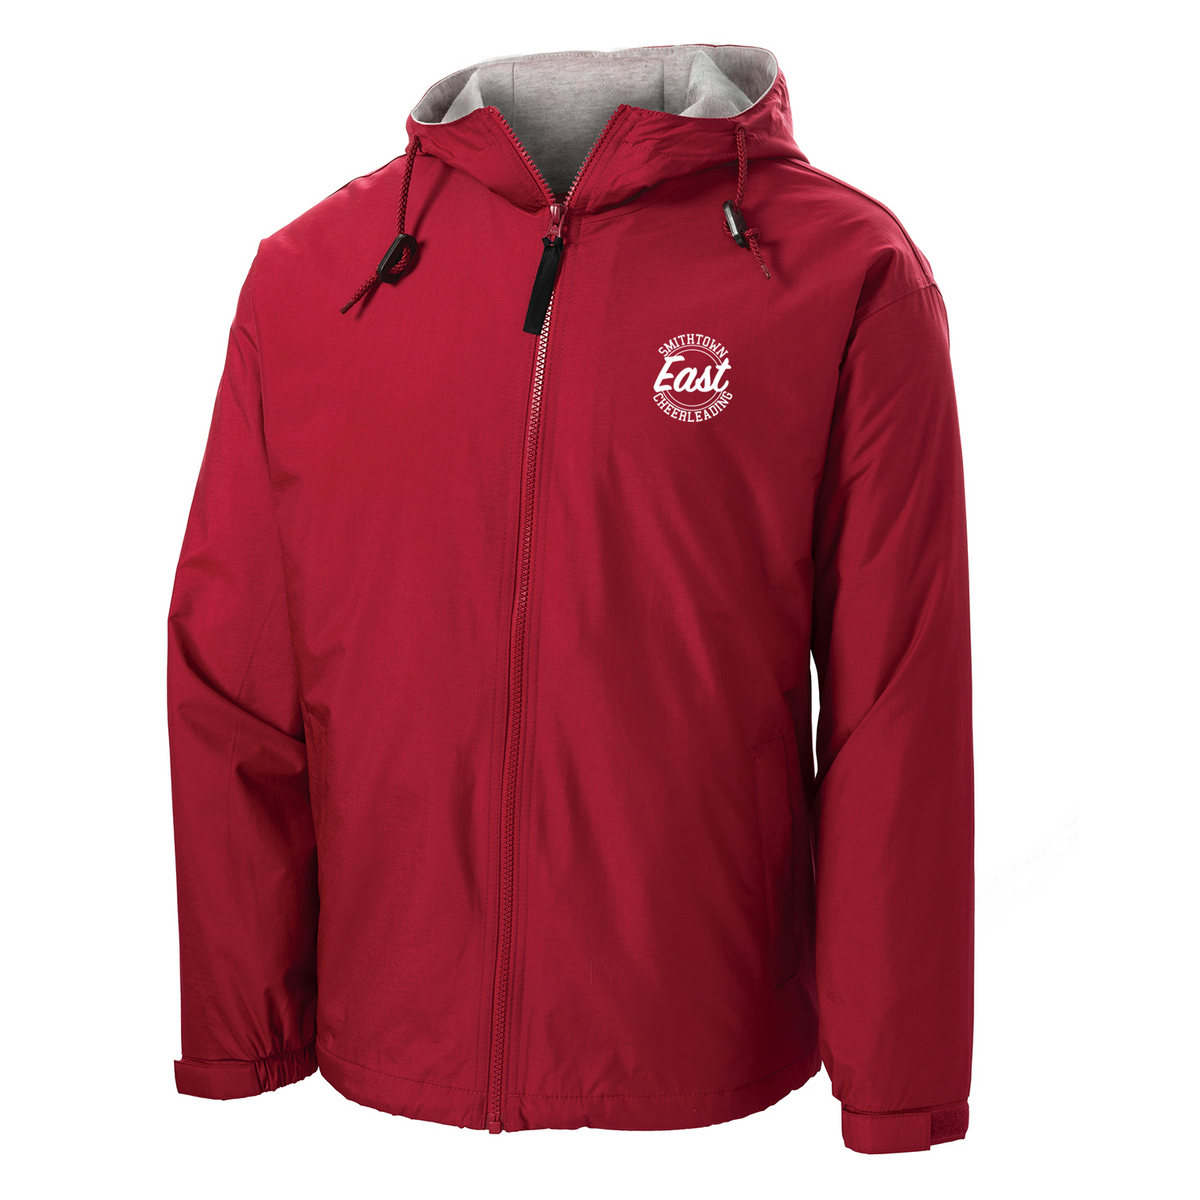 Smithtown East Cheer Hooded Jacket